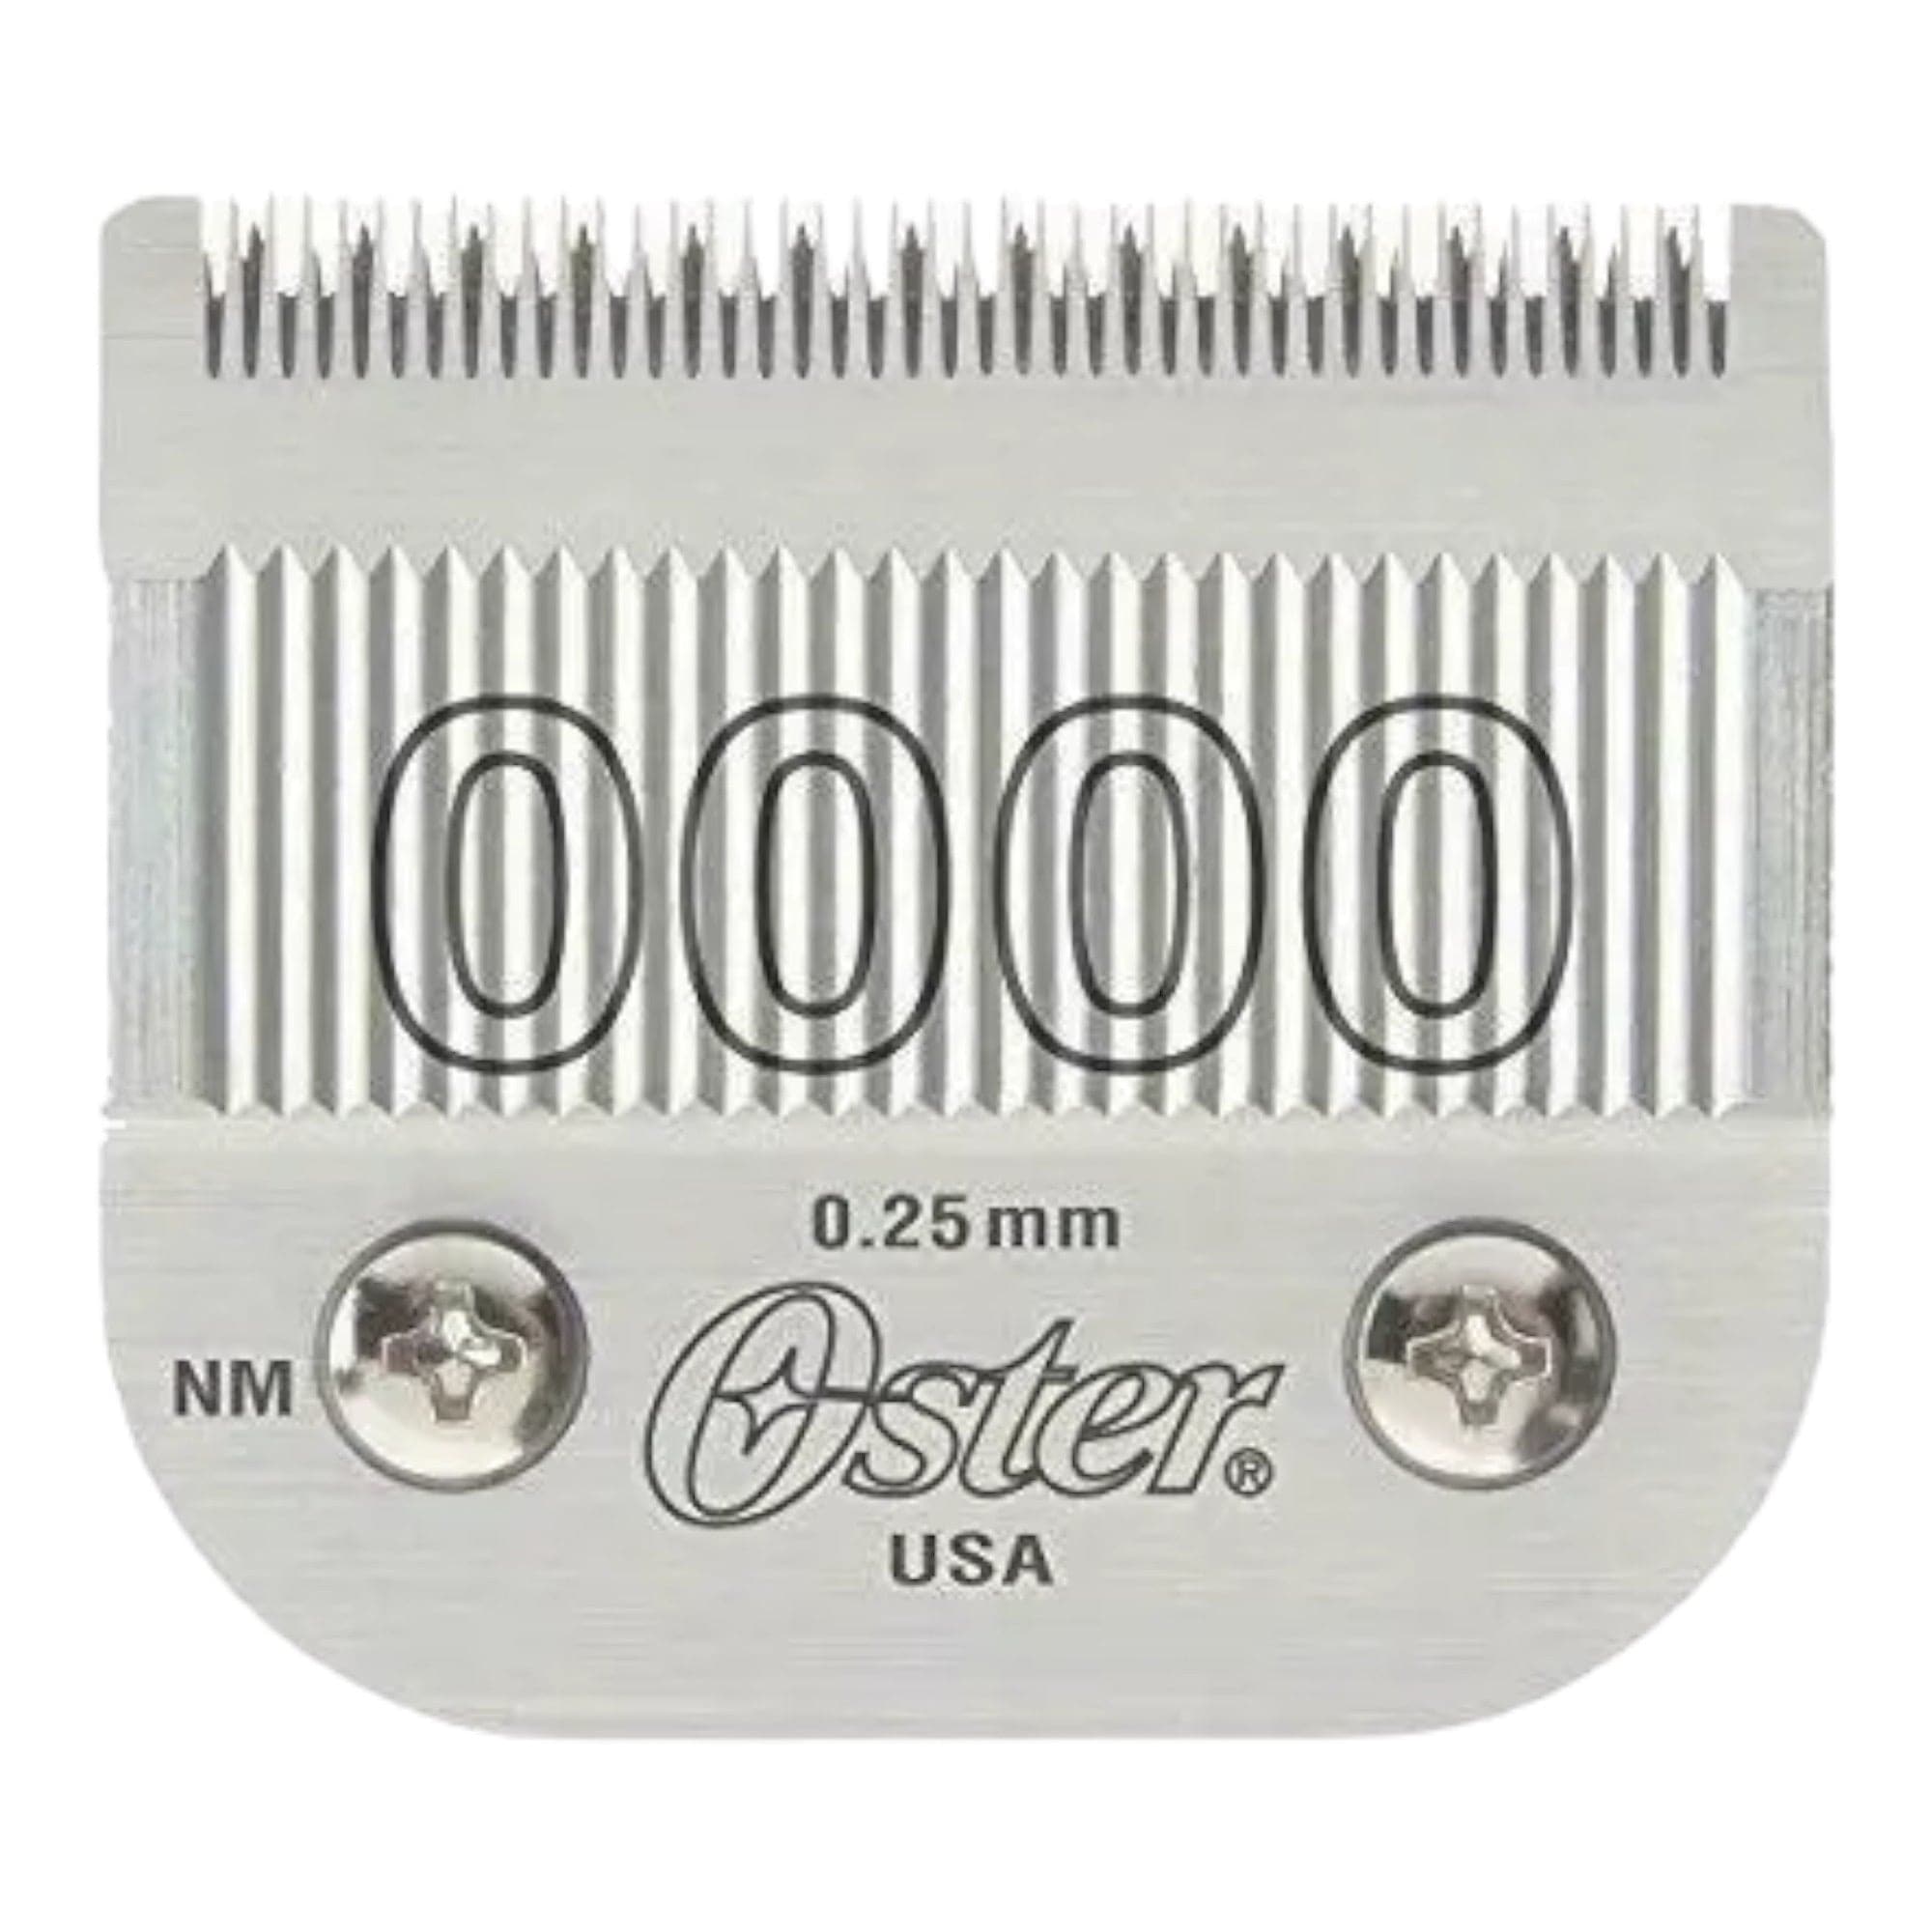 Oster - Detachable Blade Size 0000 - 0.25mm 076918-016